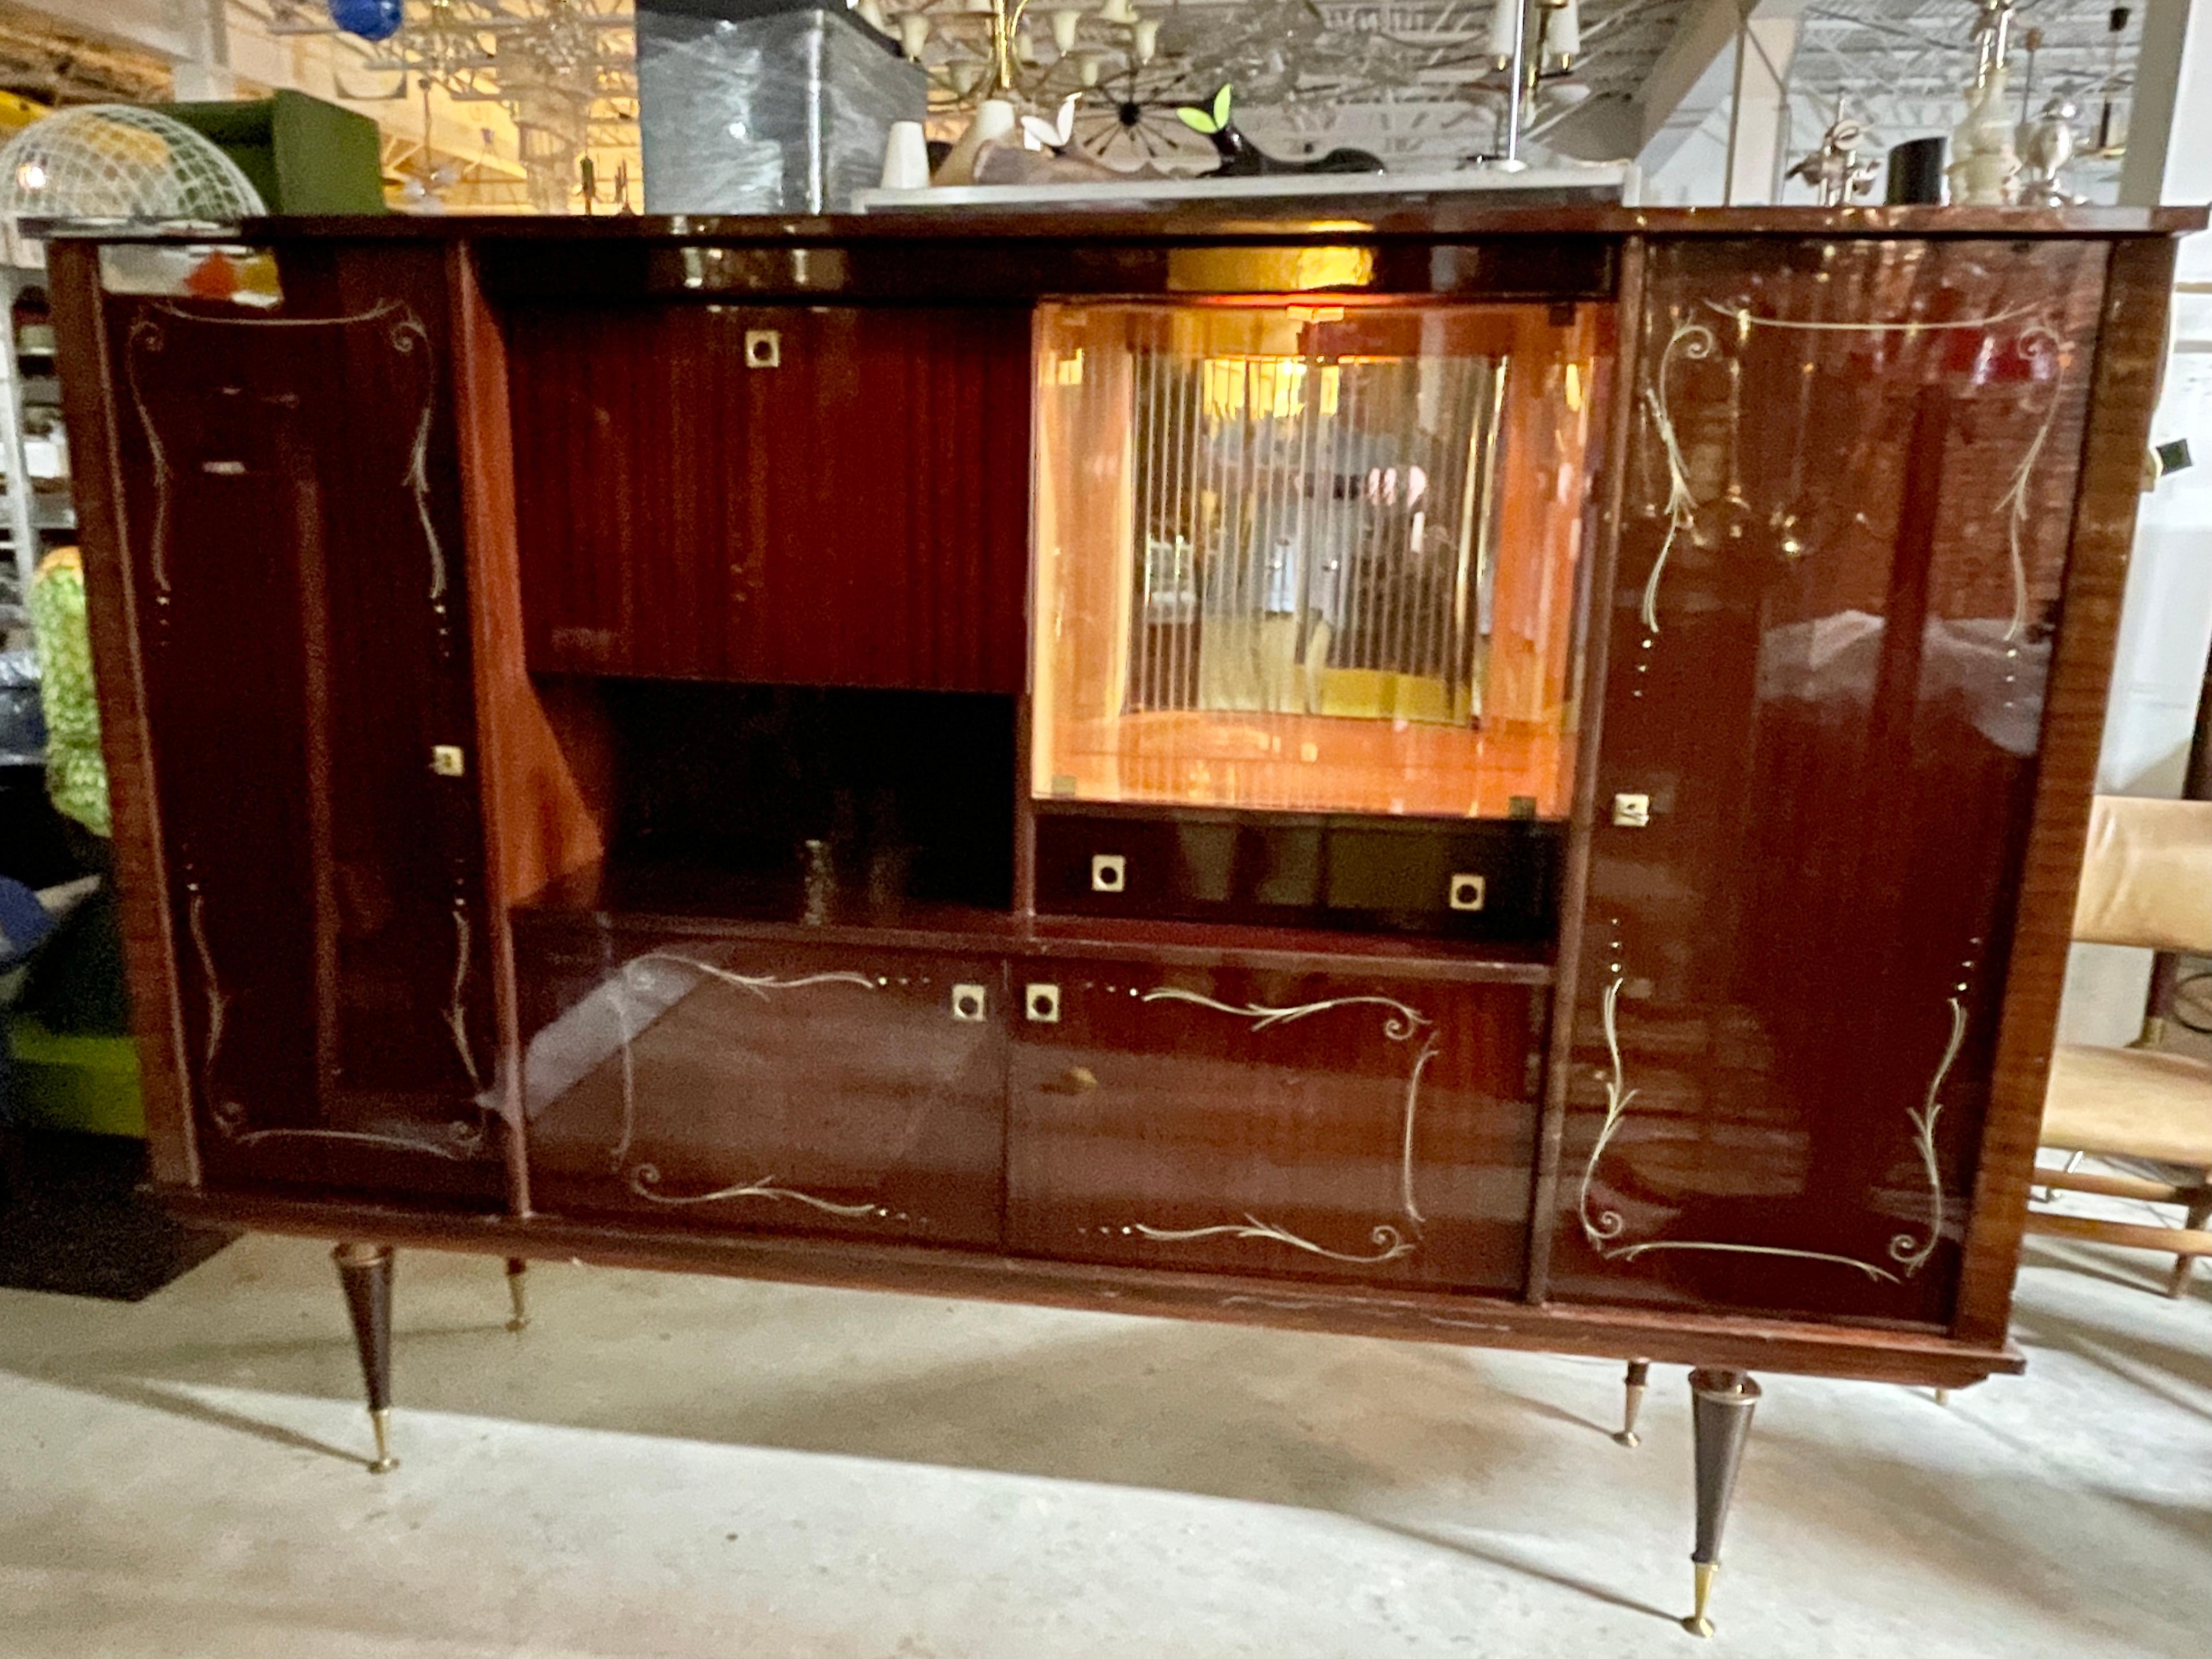 1960's French Polished Mahogany Bar & Buffet For Sale 12